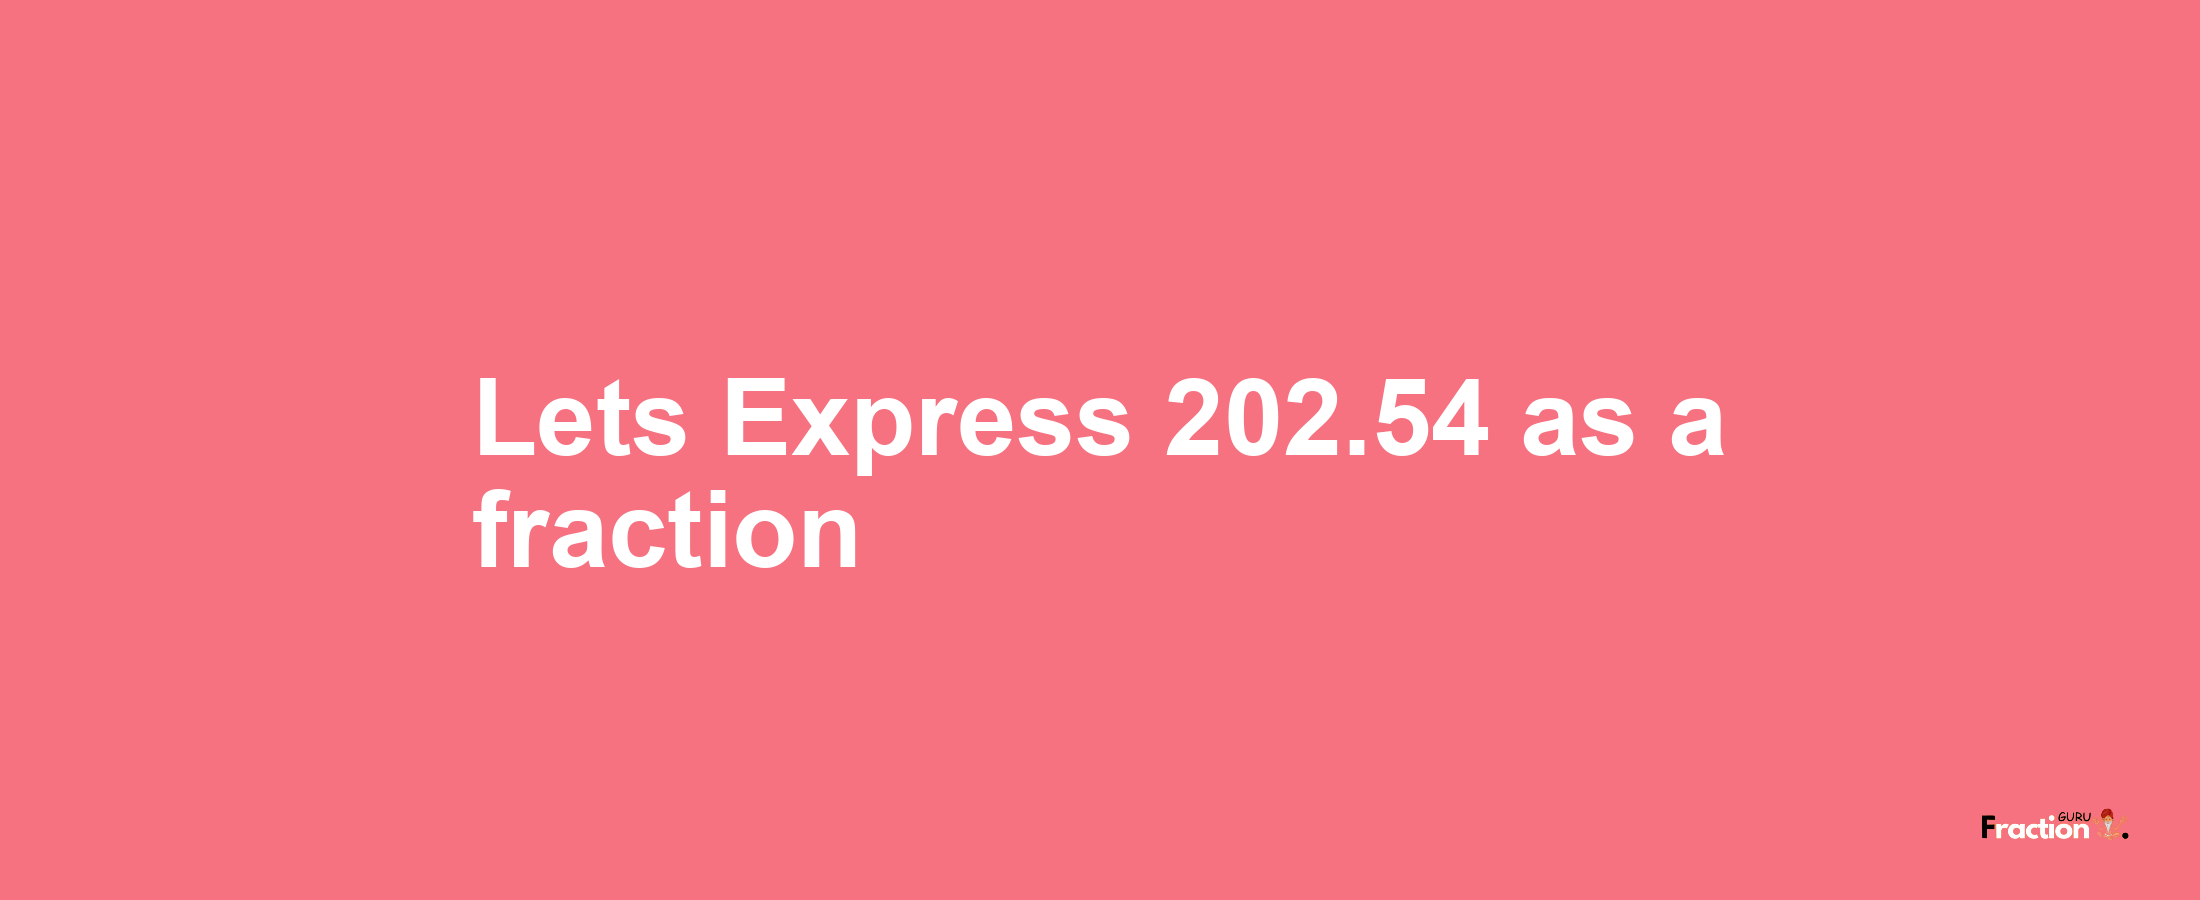 Lets Express 202.54 as afraction